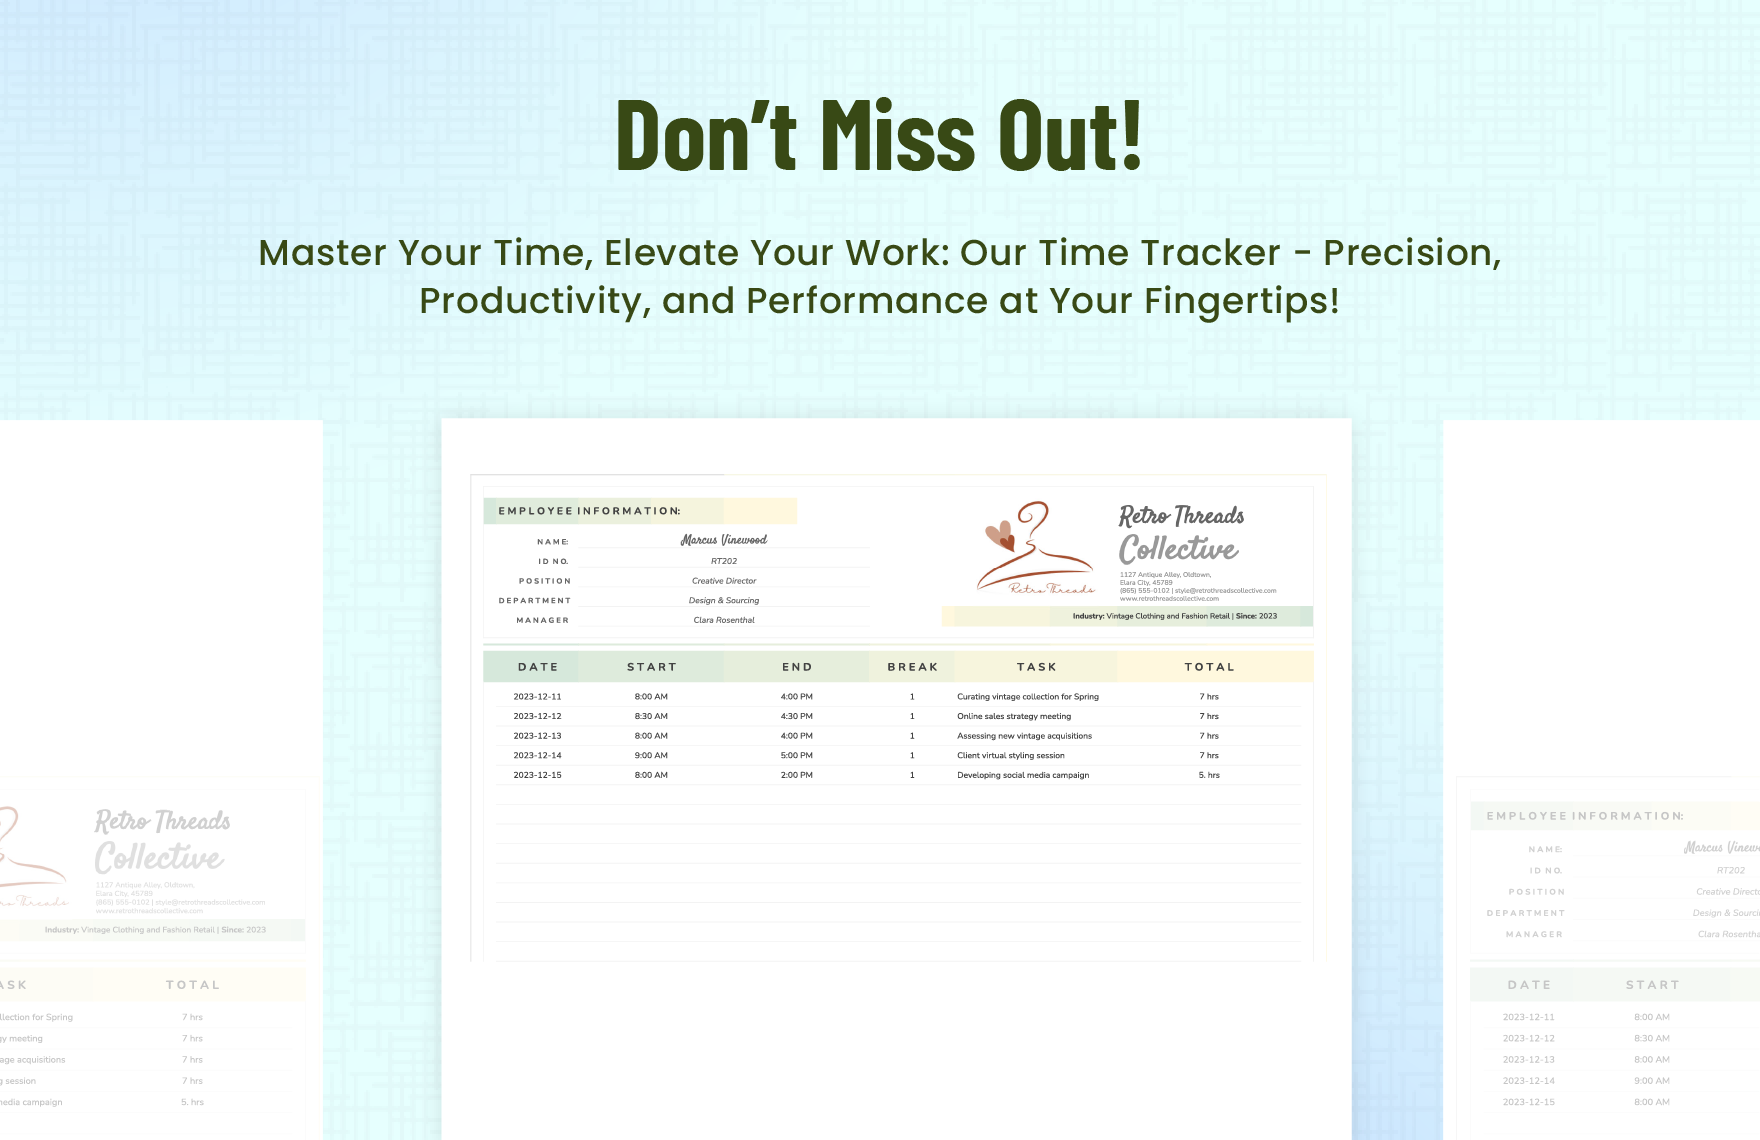 Work from Home Time Tracker Template